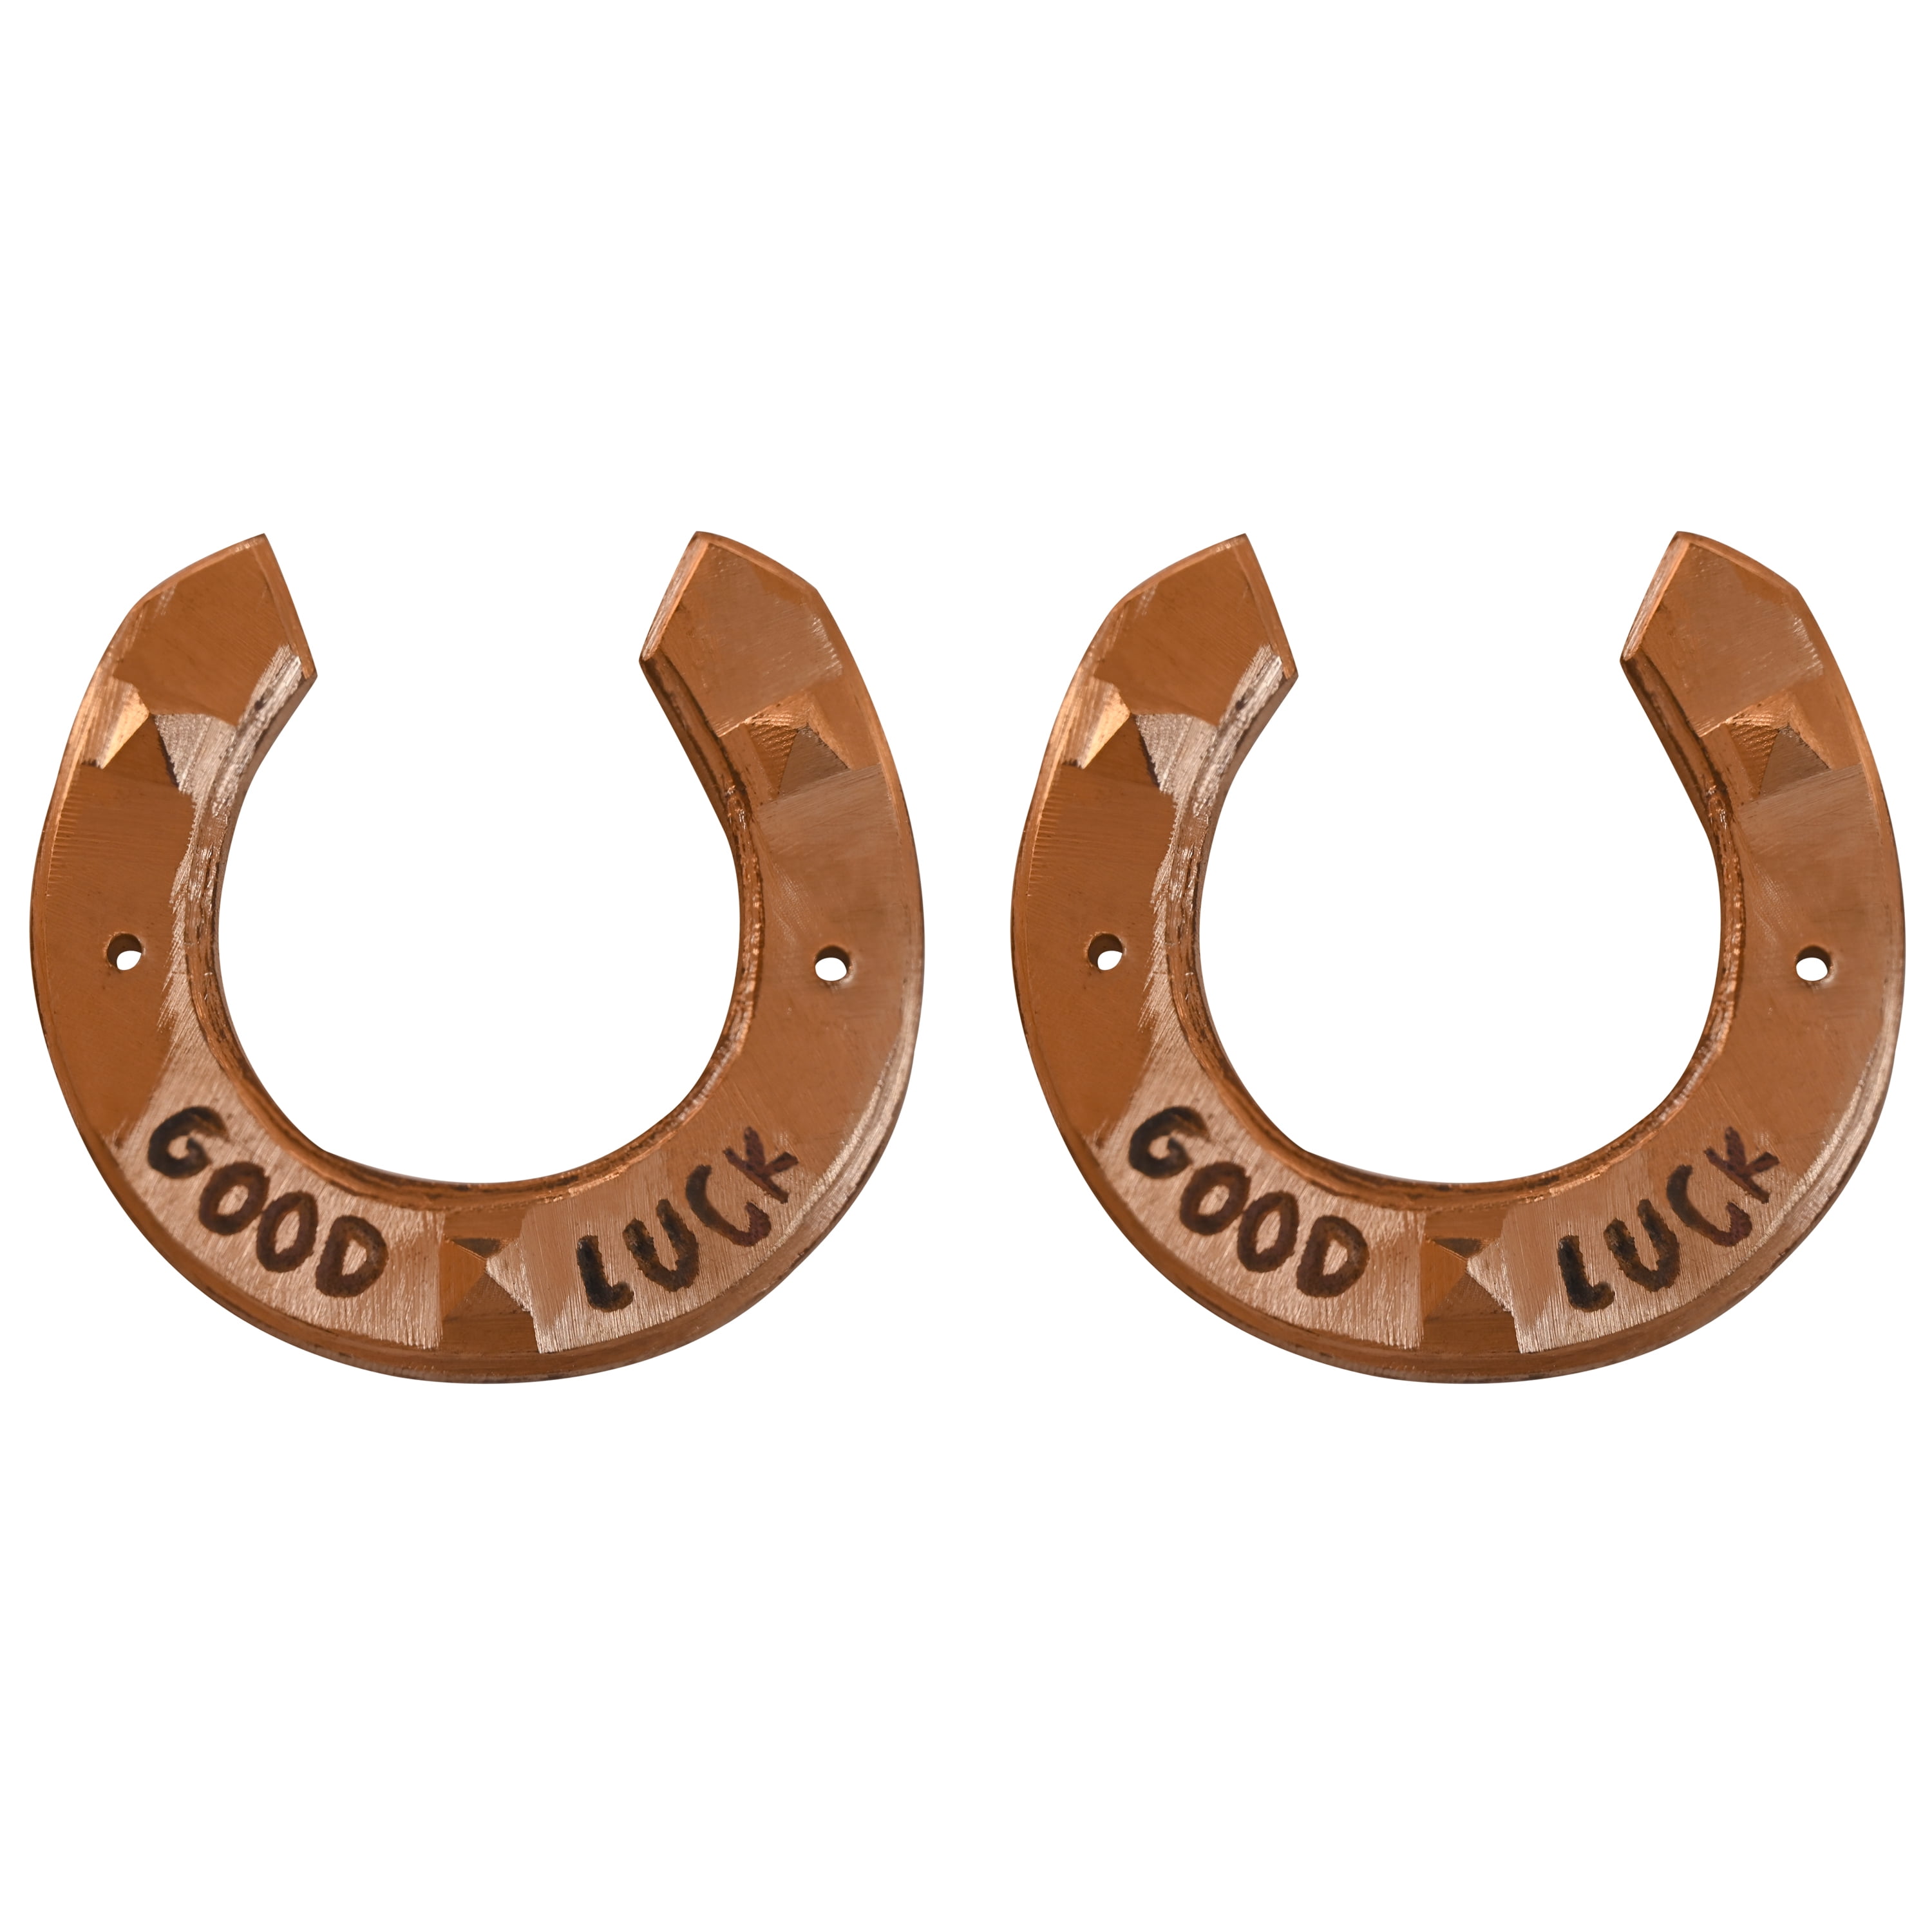 Prosperity Equestrian Horseshoes diollo Vintage Brass Good Luck Brass Horse Shoe Naal for Divine Fortune and Fengshui 